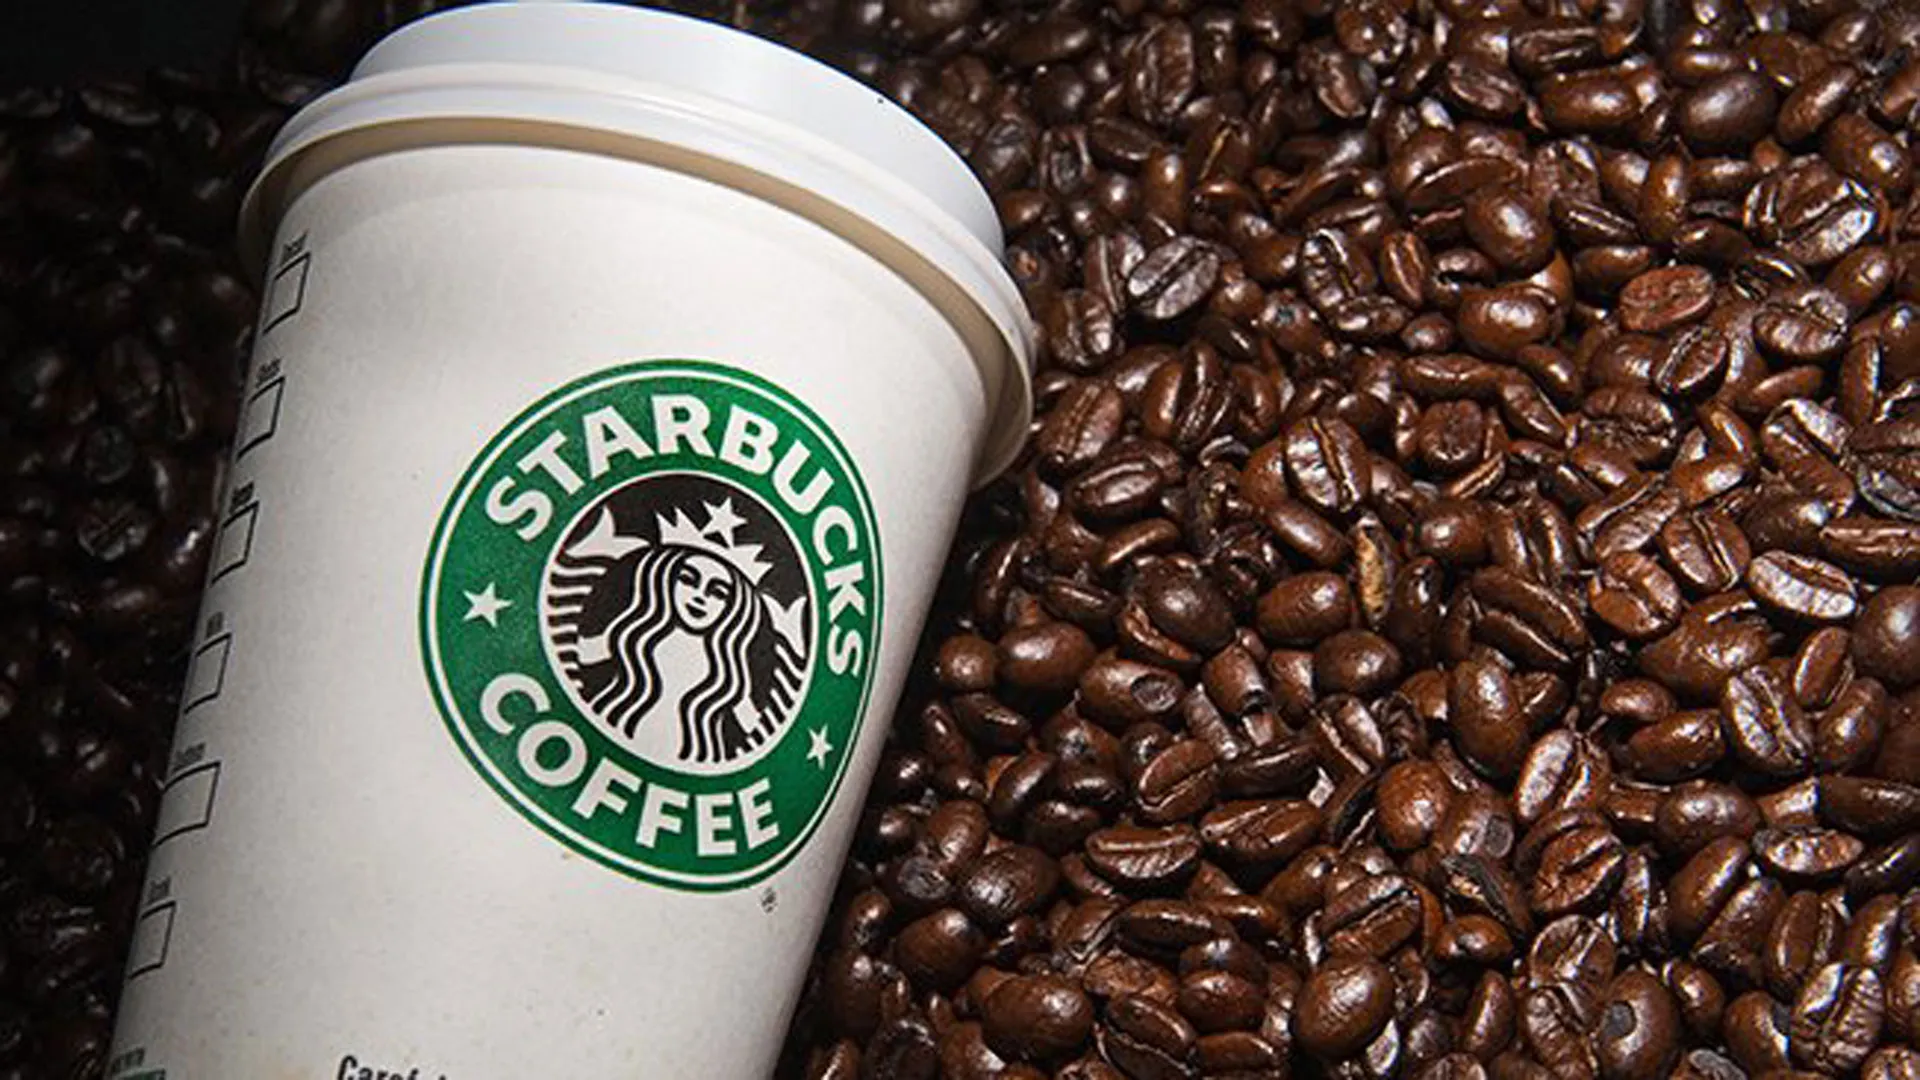 Starbucks and Tata Group Forge Ahead with Ambitious Expansion Plans in India